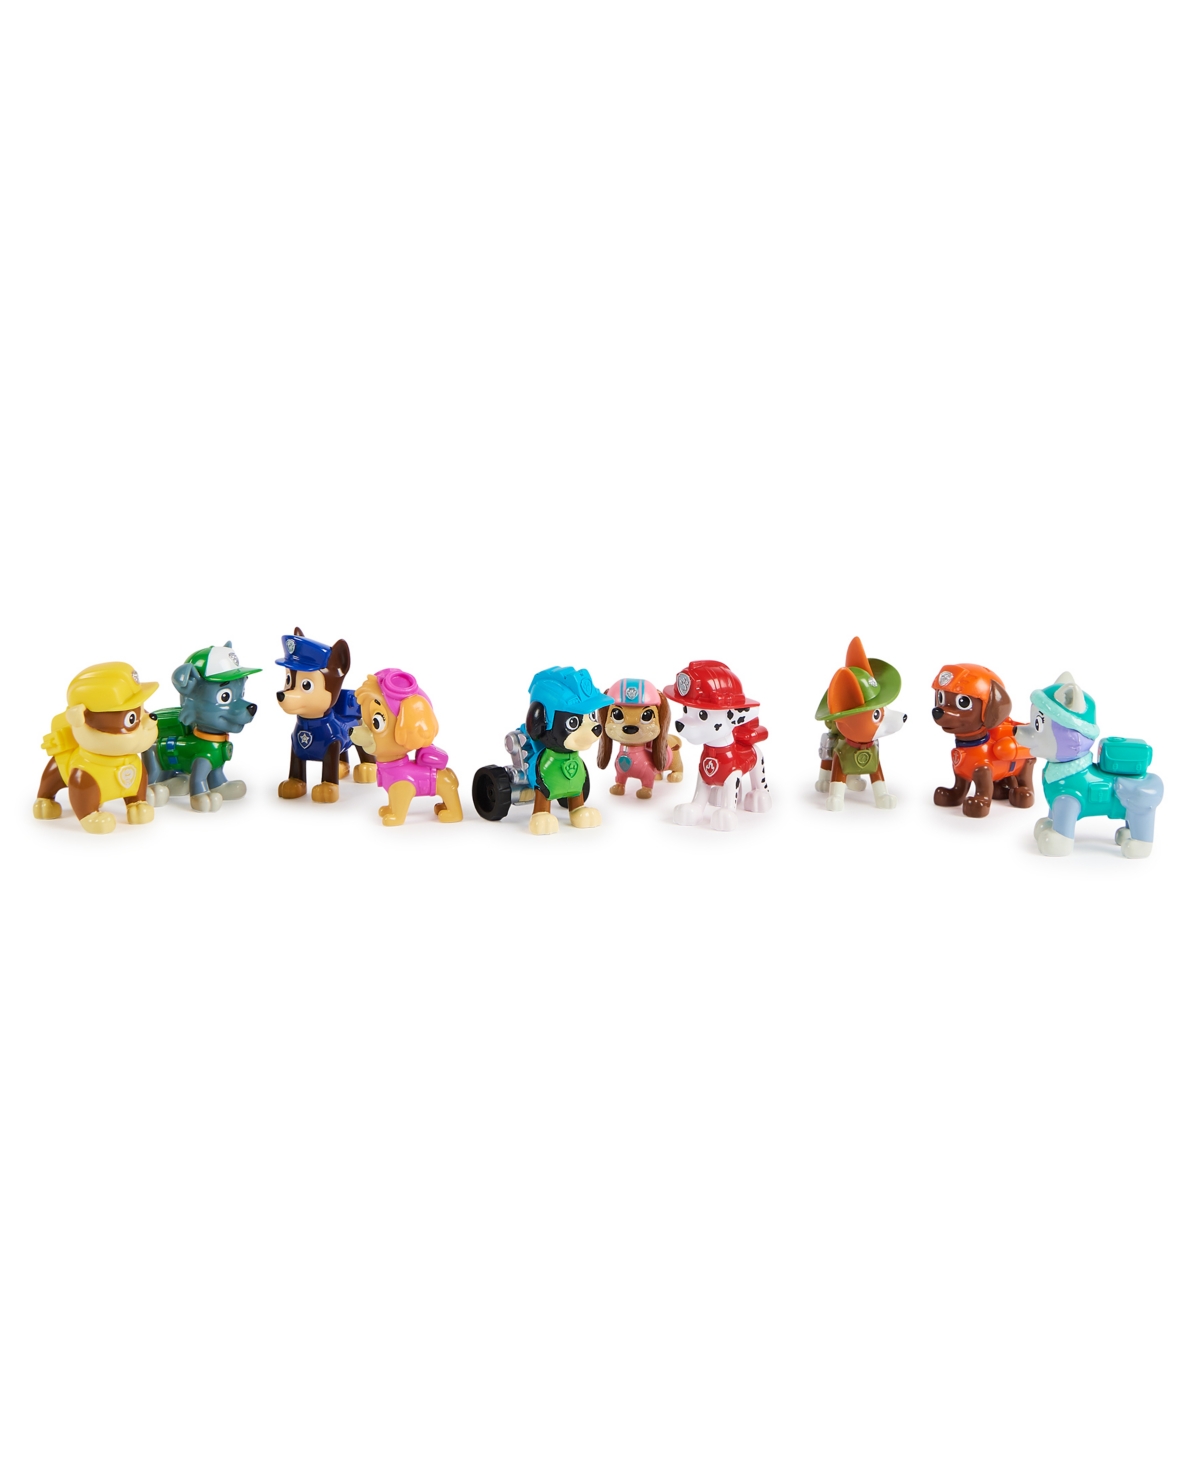 Shop Paw Patrol All Paws On Deck Toy Figures Gift Pack With 10 Collectible Action Figures In Multi-color